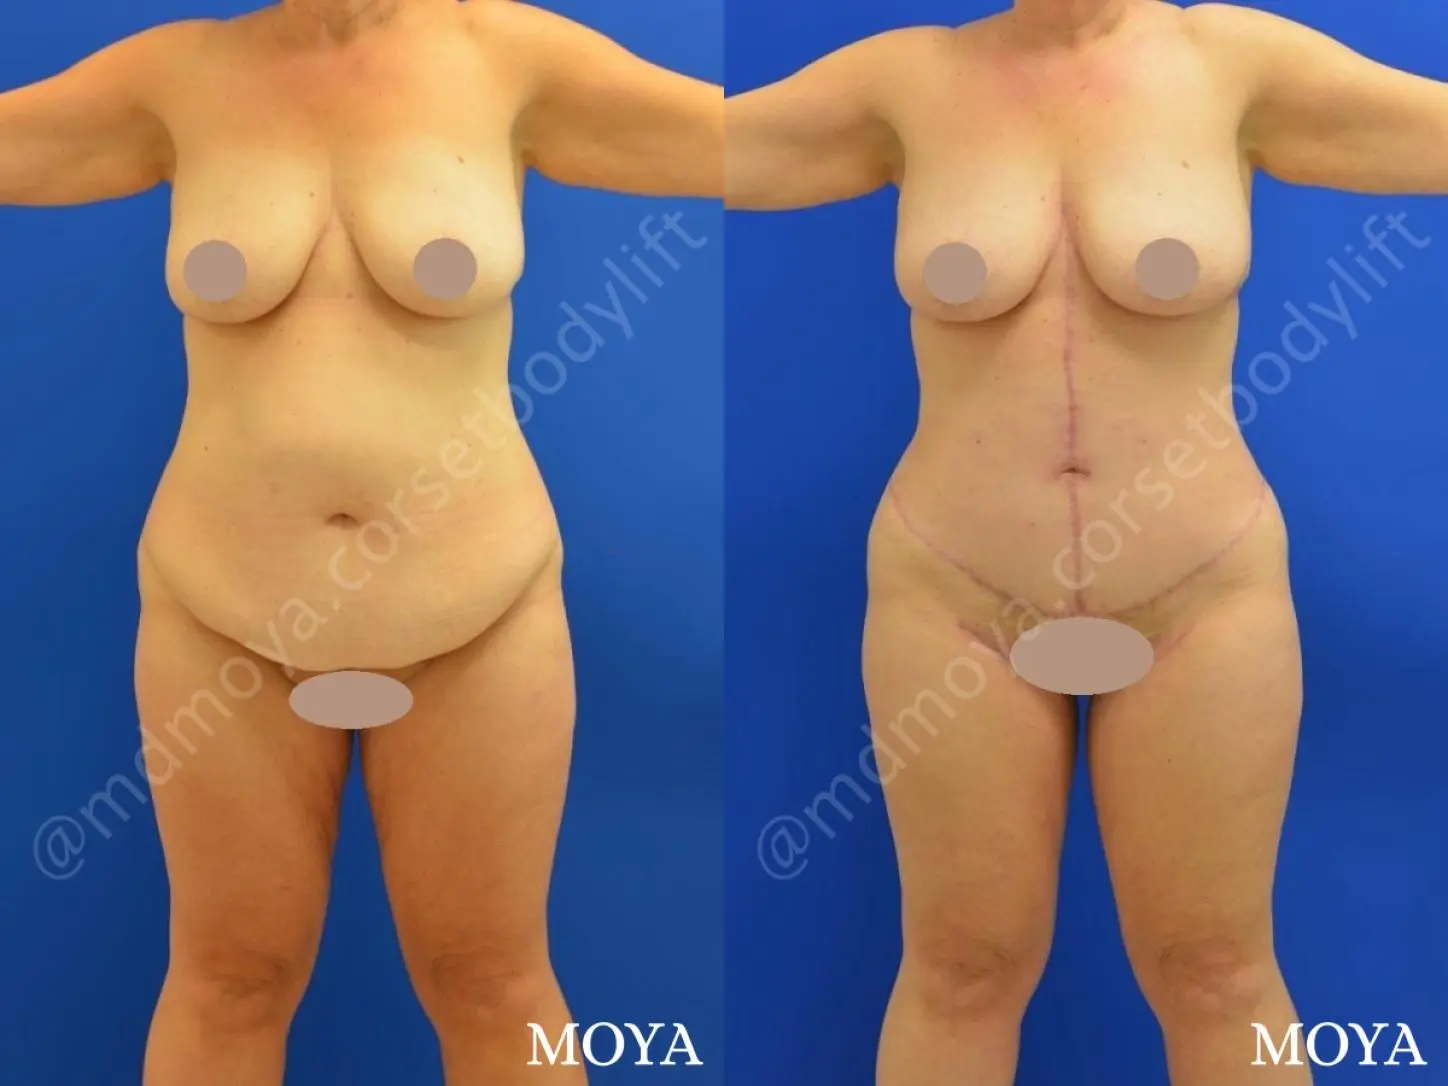 Fleur-de-lis Tummy Tuck (std):  BMI 29 - Before and After 1